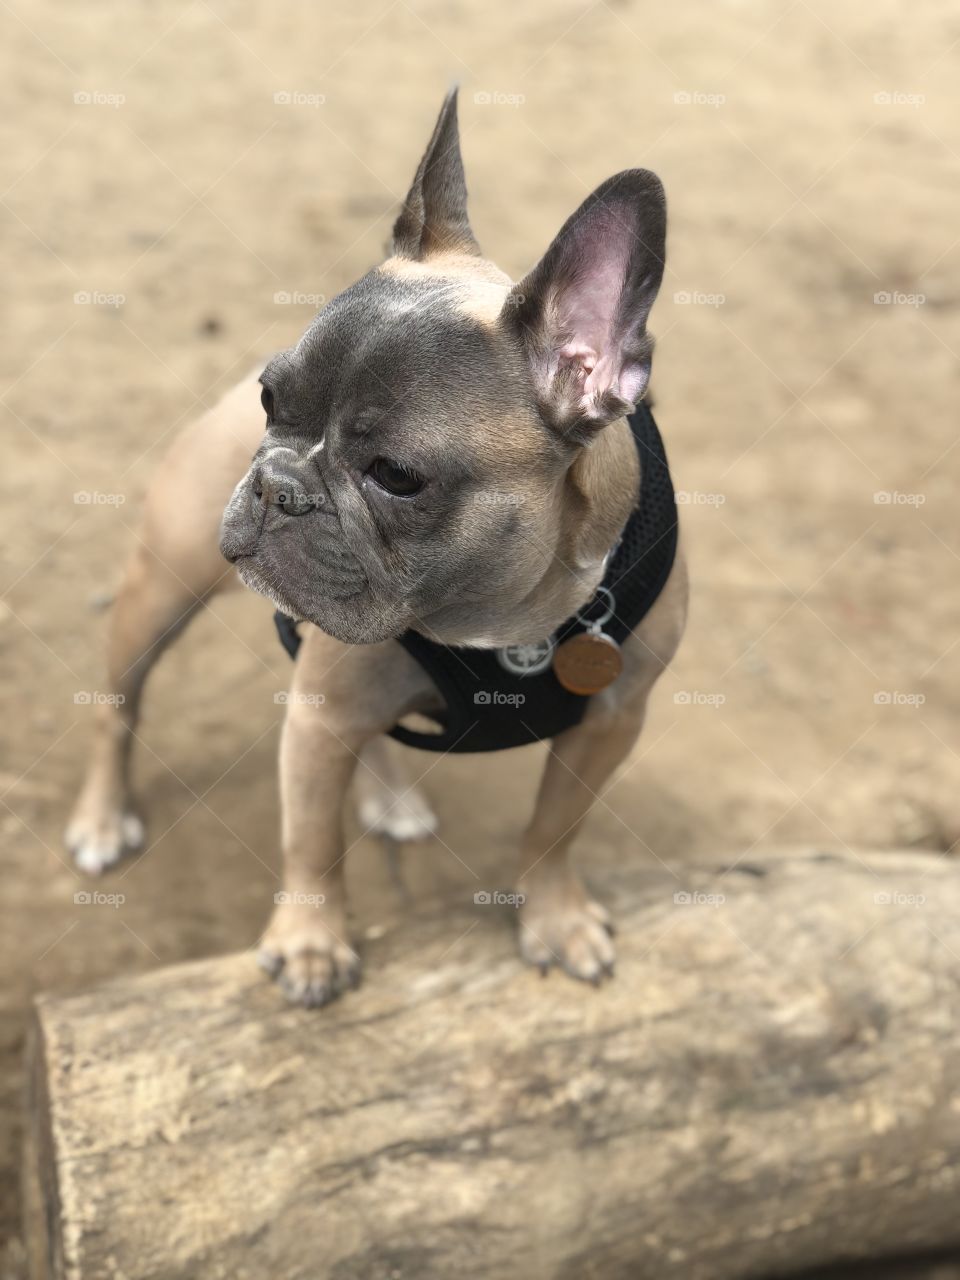 My french bulldog puppy at the dog park ready to play 